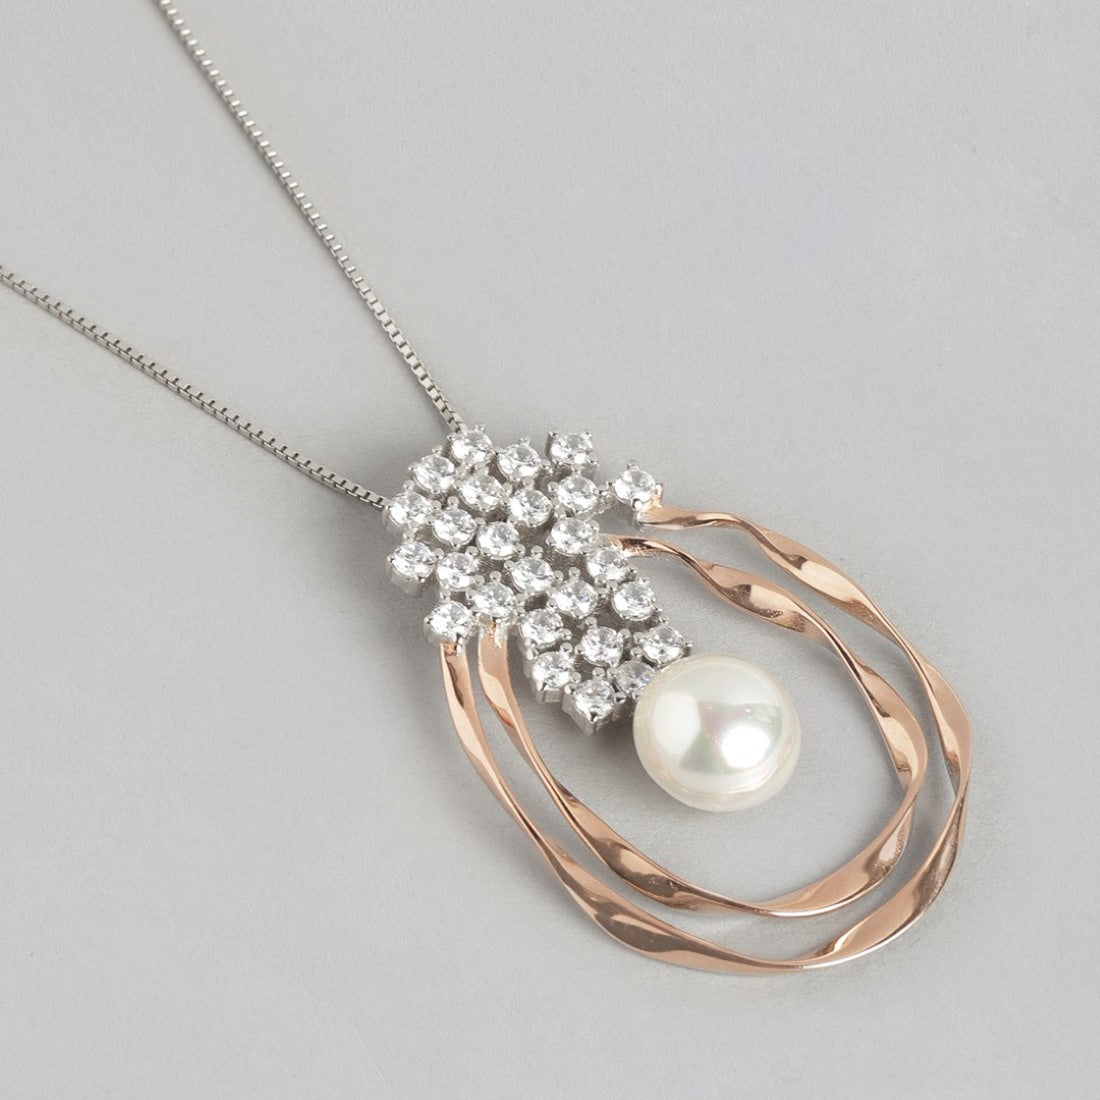 Dual Tone Pearl Abstract Radiance 925 Sterling Silver Pendant with Chain